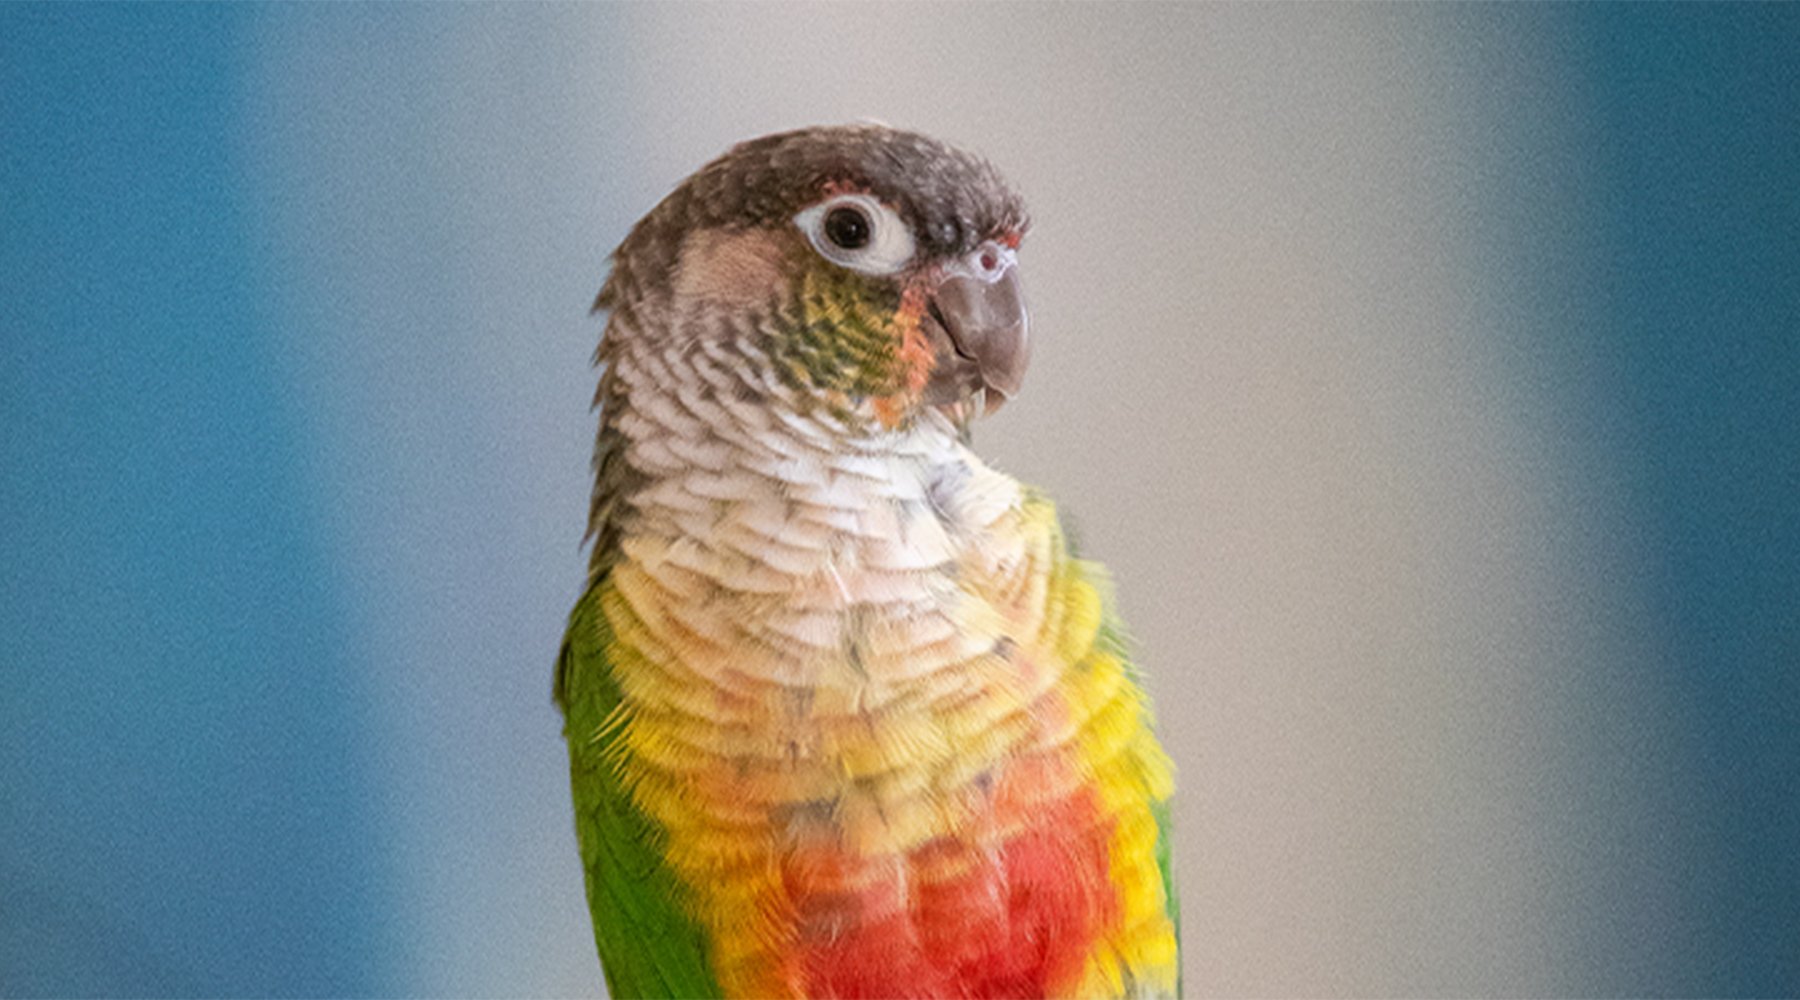 Rolex the multicolored conure poses on a blue background